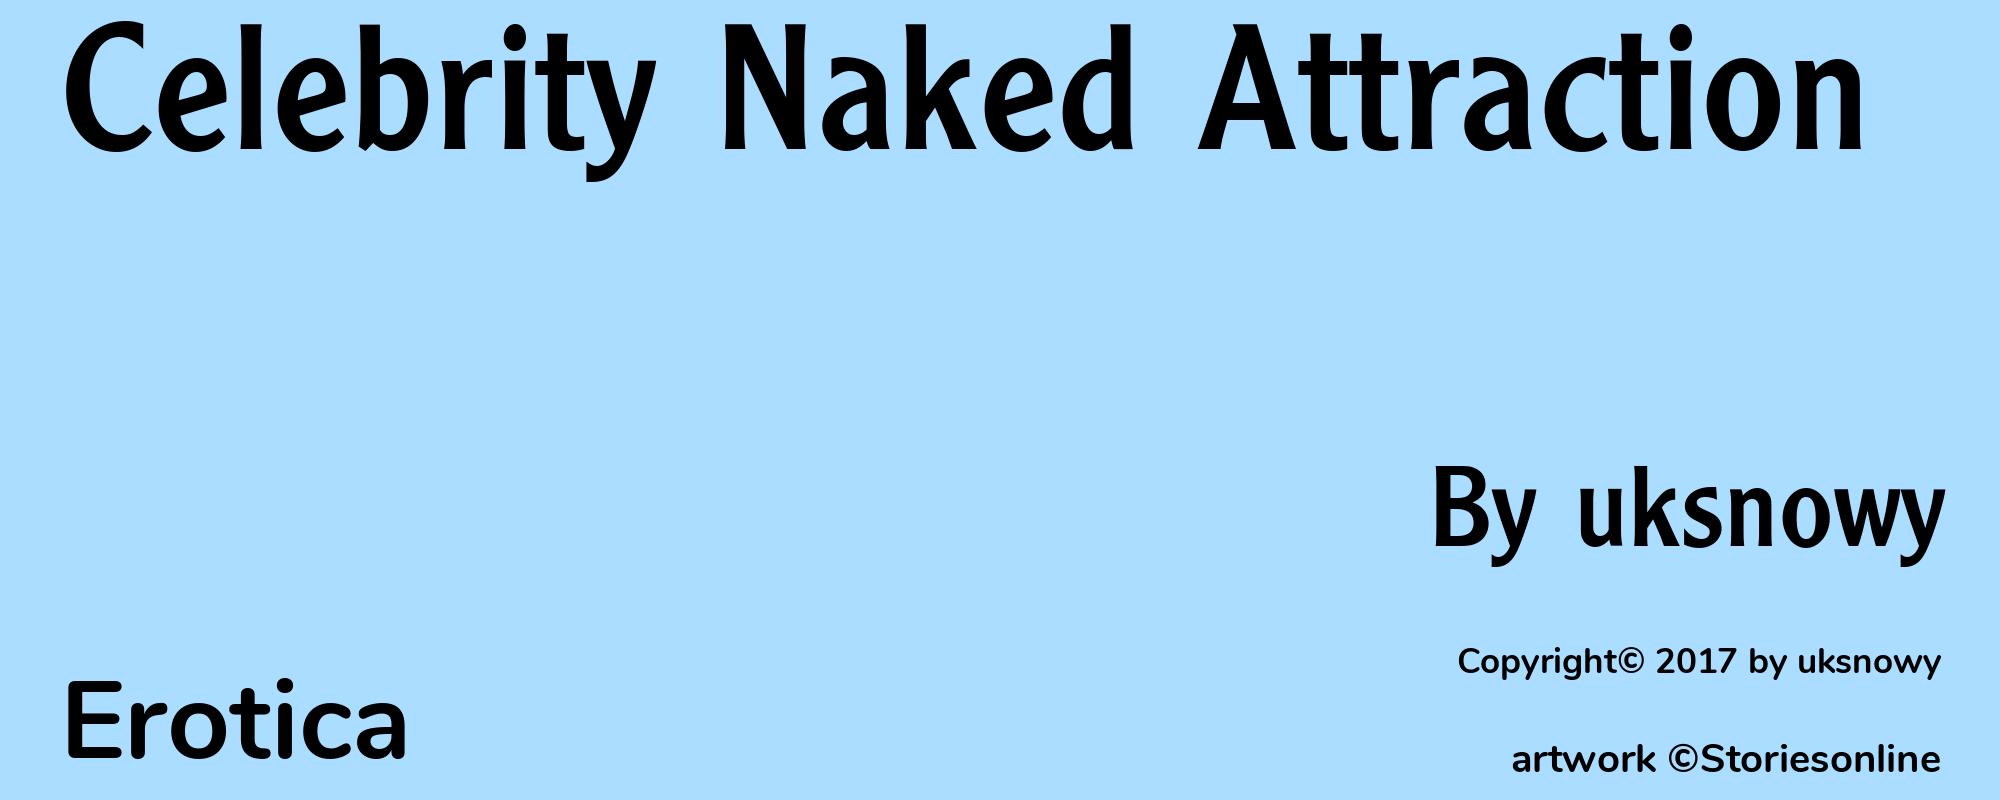 Celebrity Naked Attraction - Cover